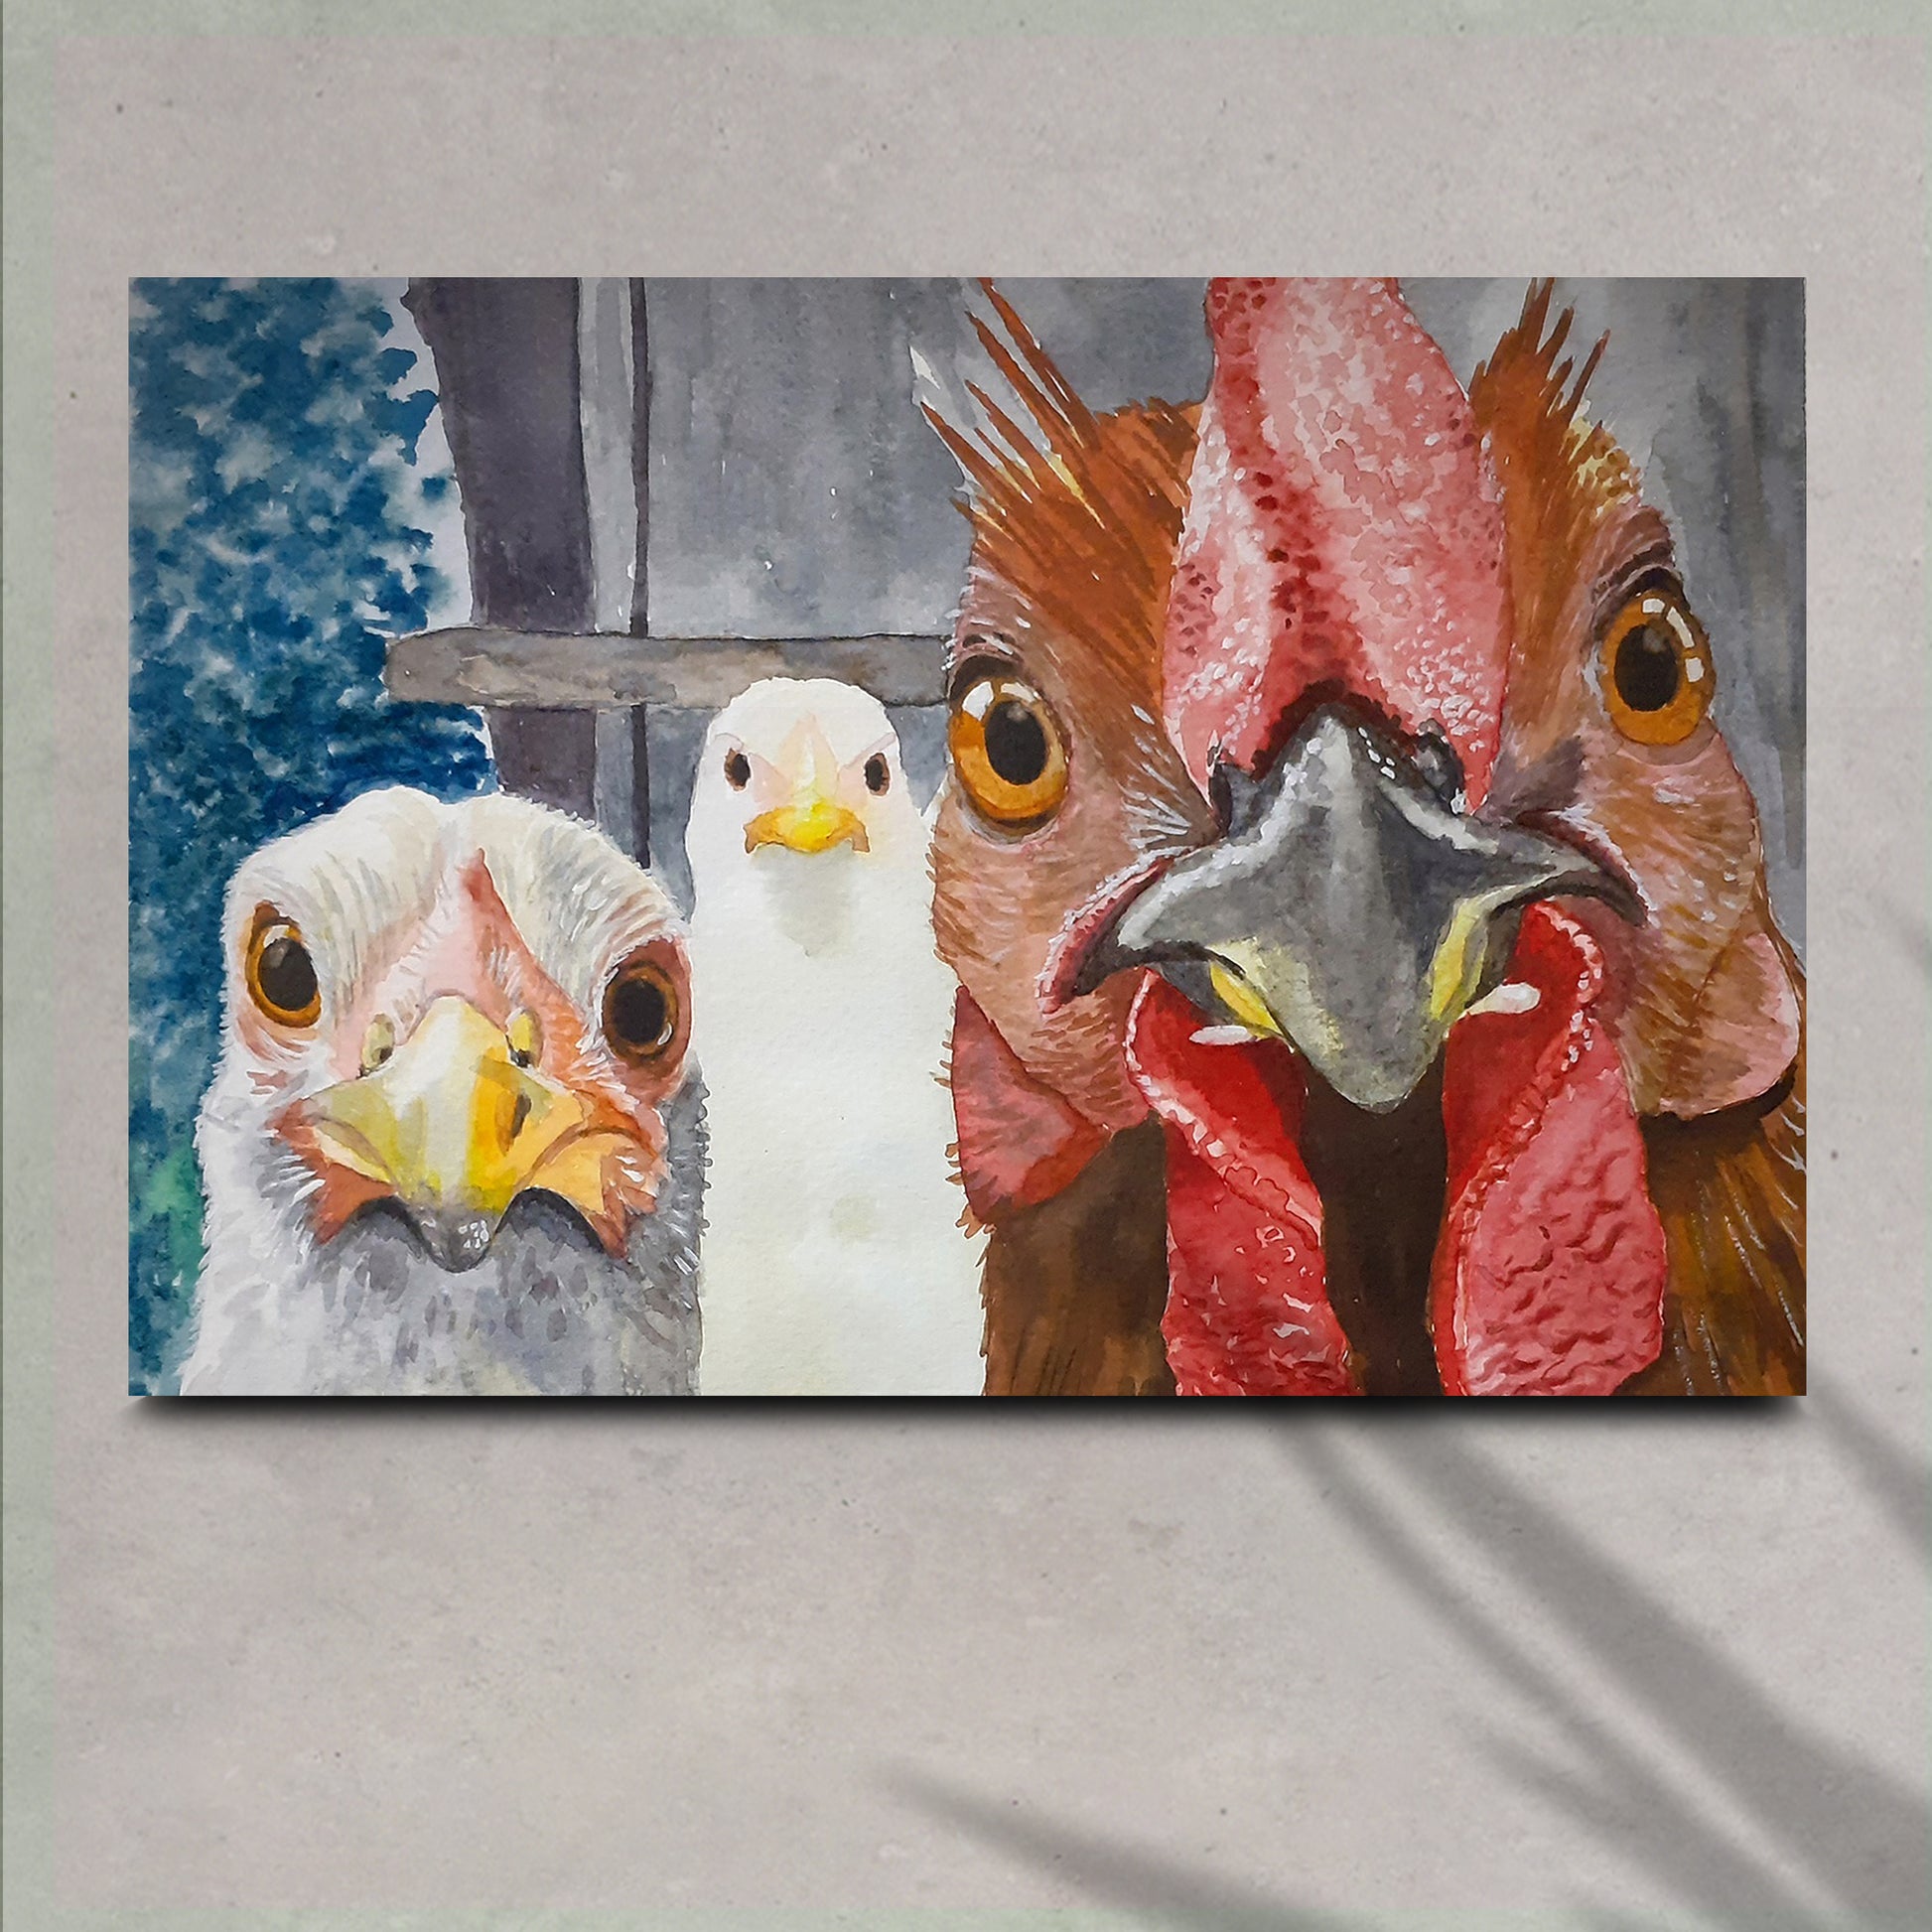 Chicken Heads Painting Canvas Wall Art - Image by Tailored Canvases